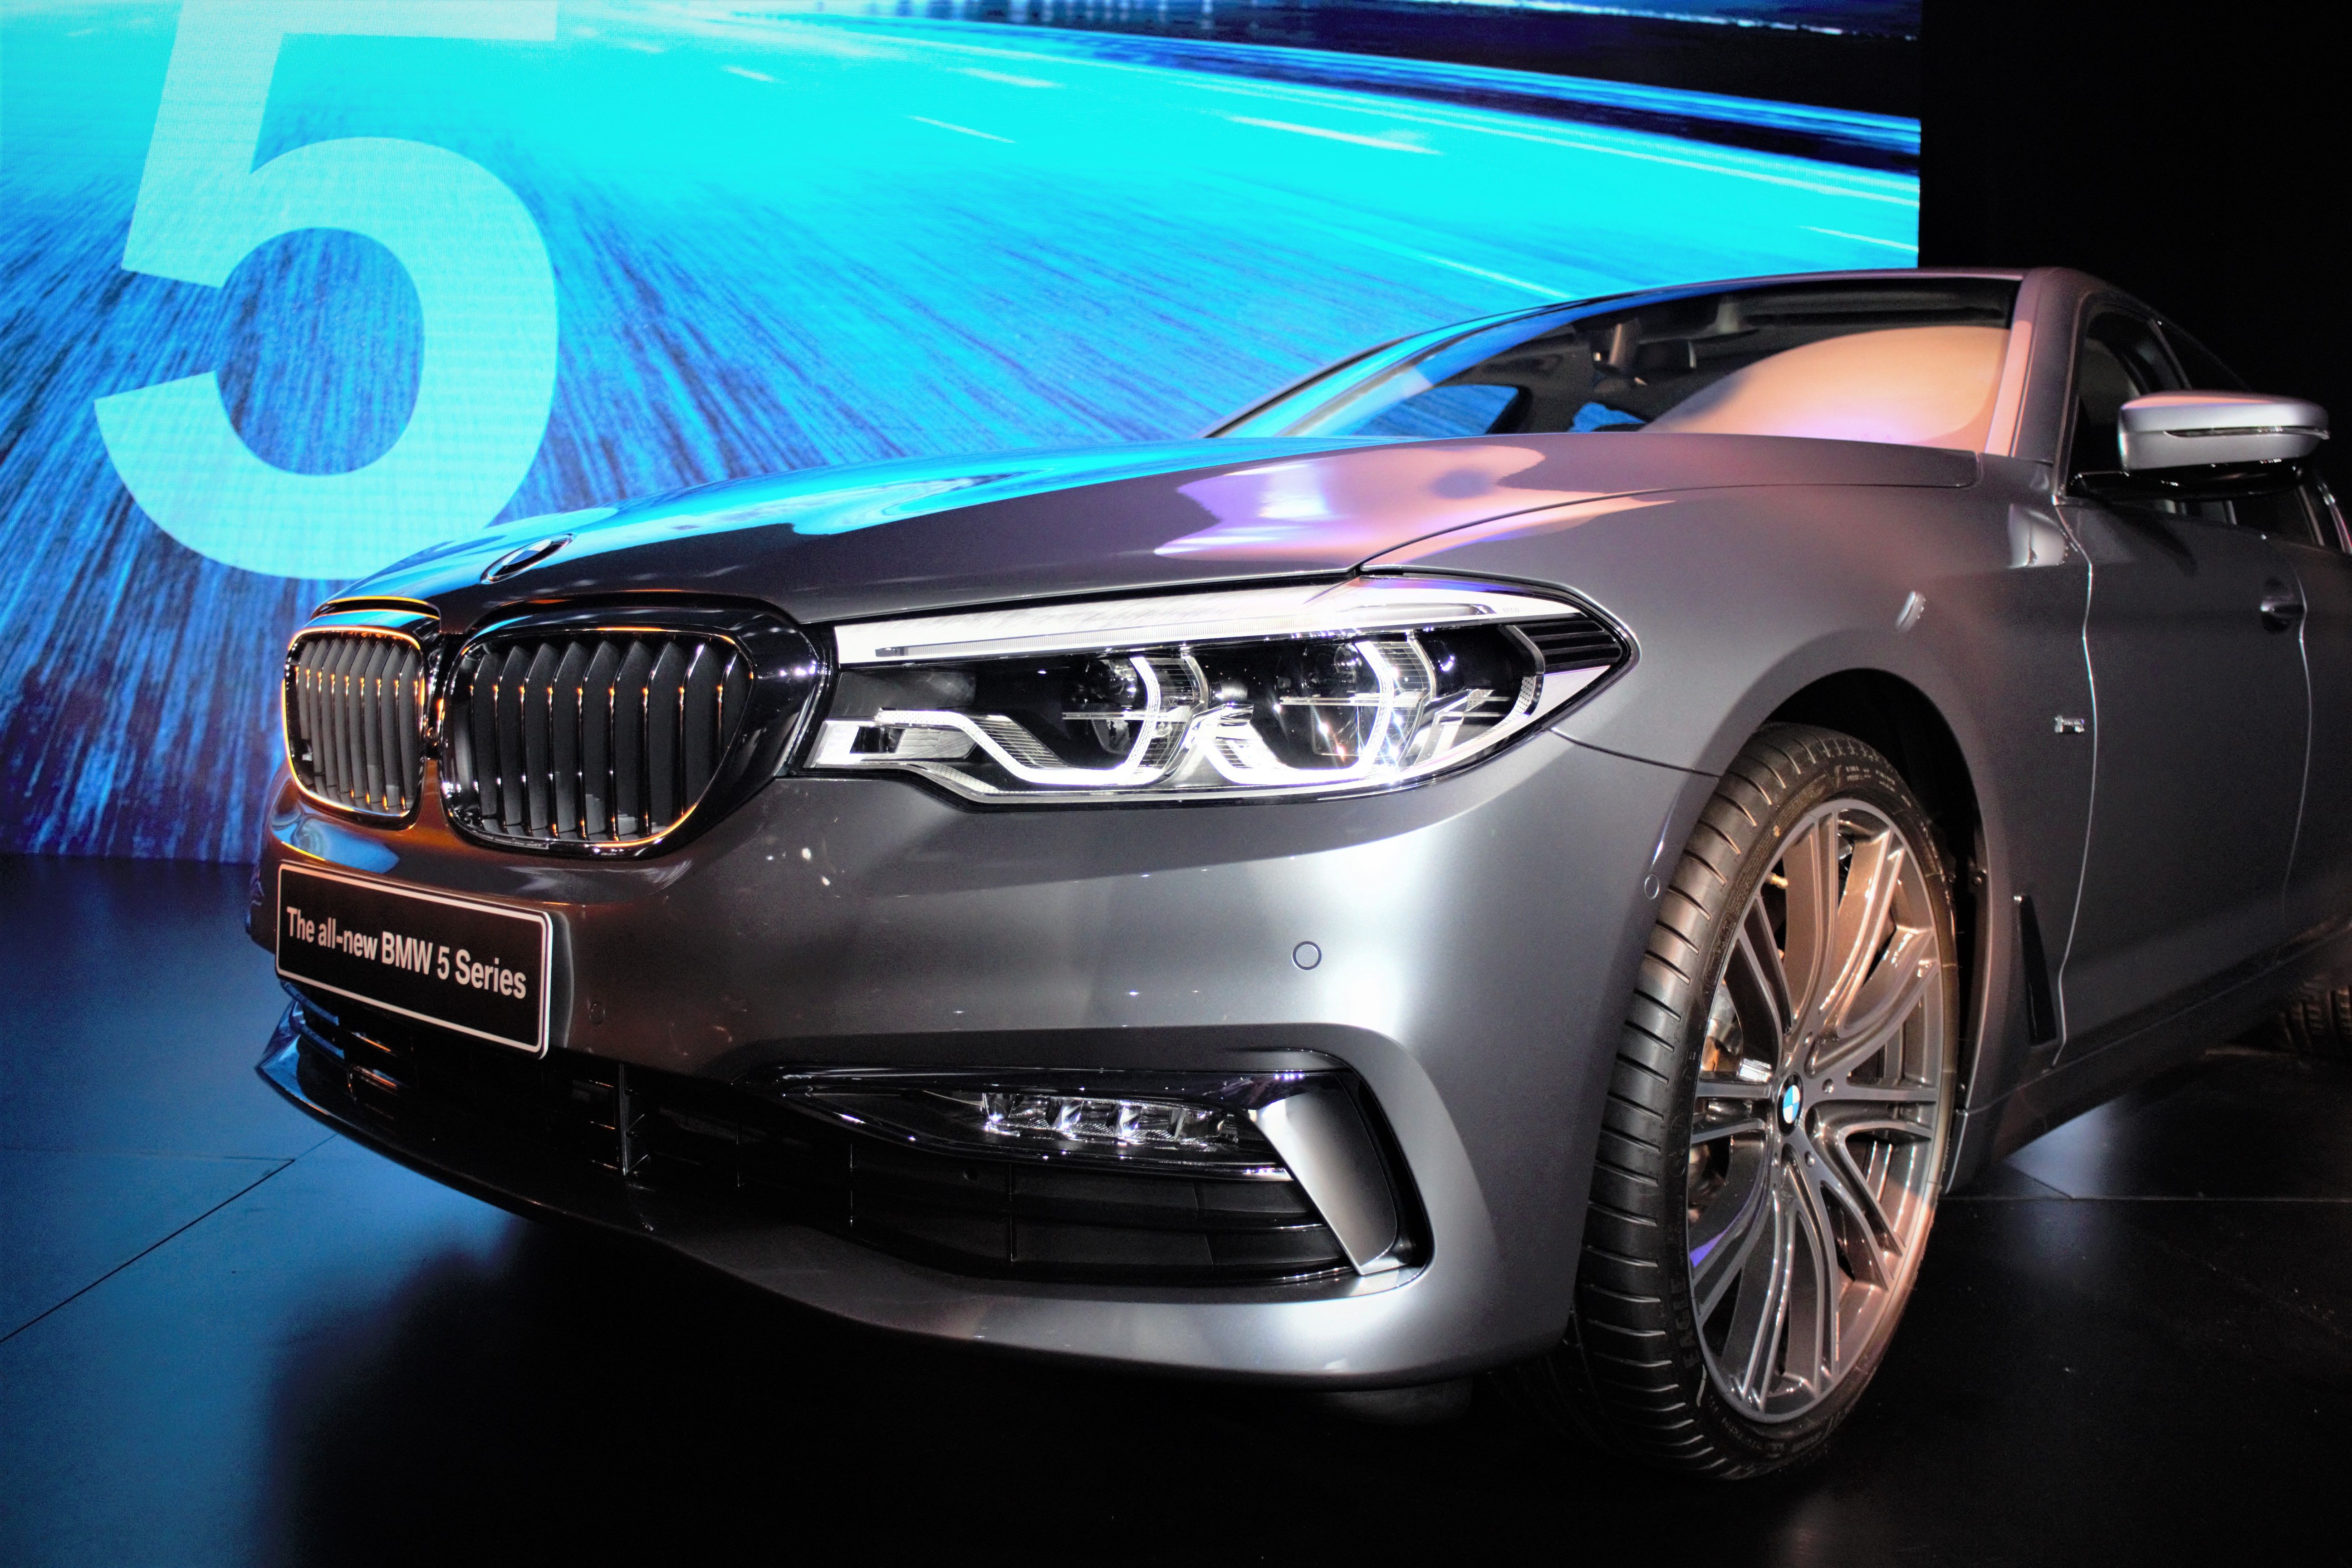 BMW PH Introduces All-New BMW 5 Series